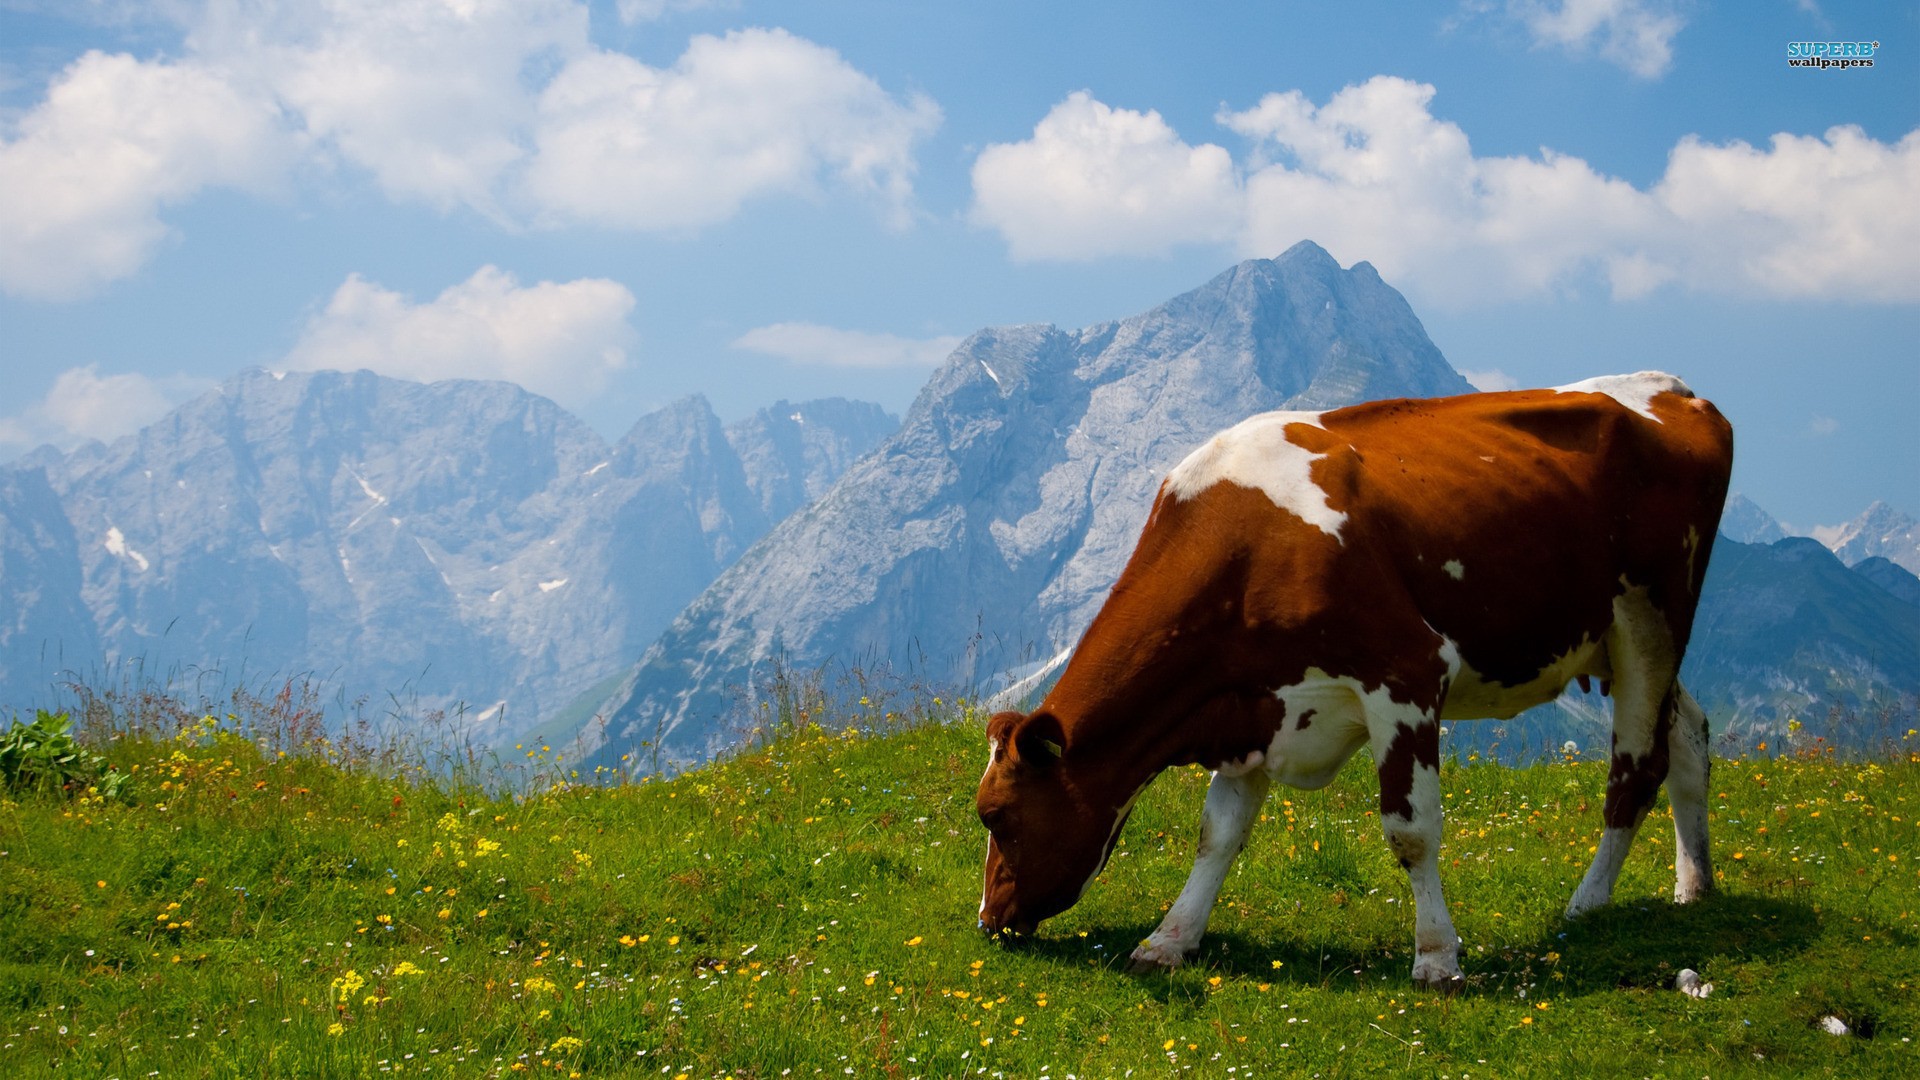 The Cow In Alpine Field Wallpaper And Image